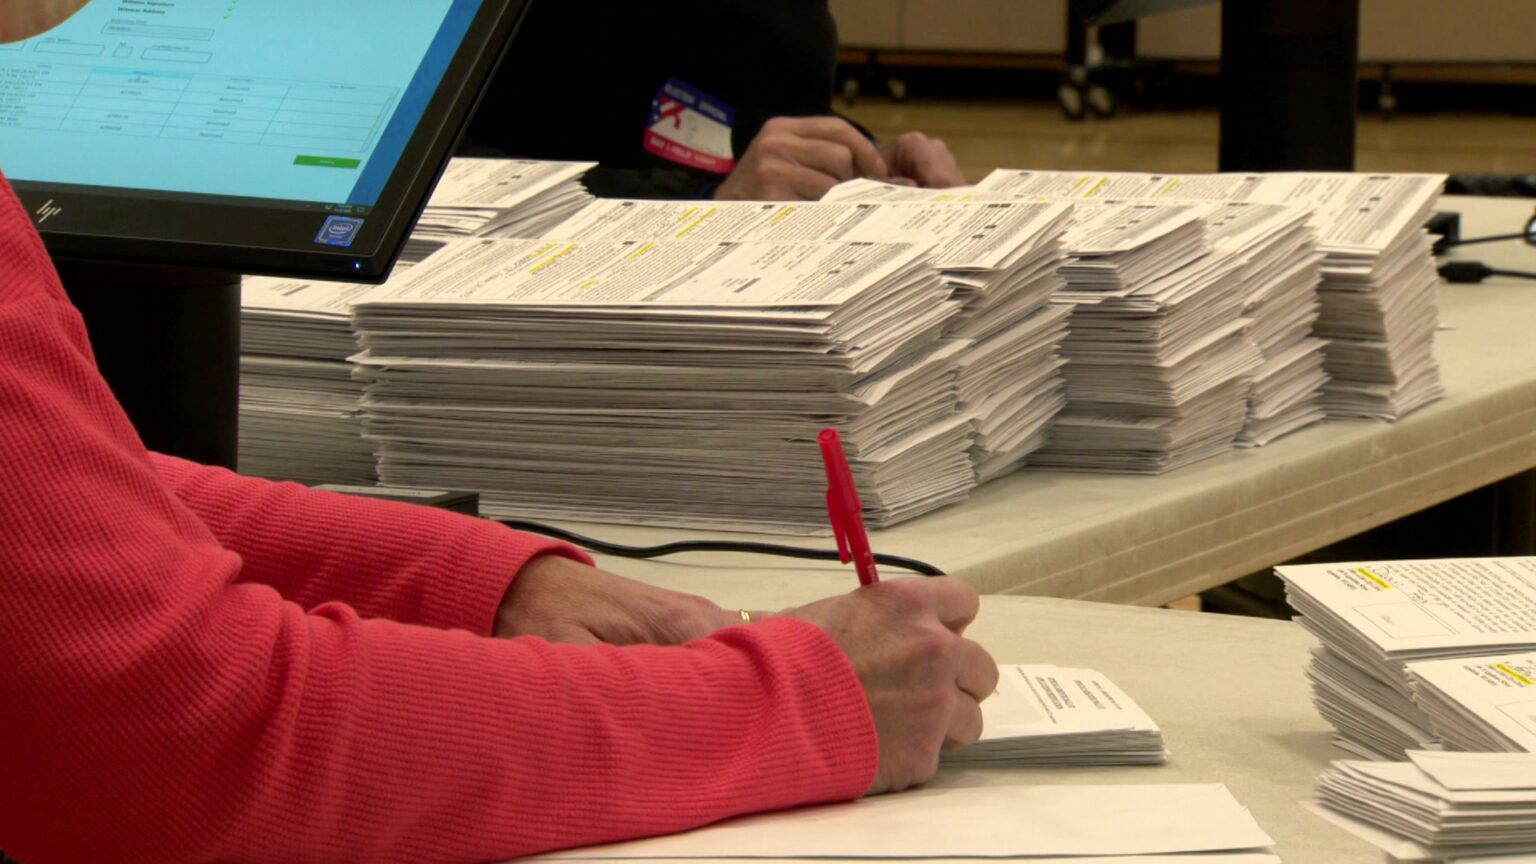 The arms of a seated person use a pen to mark an absentee ballot envelop on the surface of a folding table, with stacks of additional envelopes on the tabletop and another election worker conducting the same work at an adjacent table with multiple stacks of envelopes.